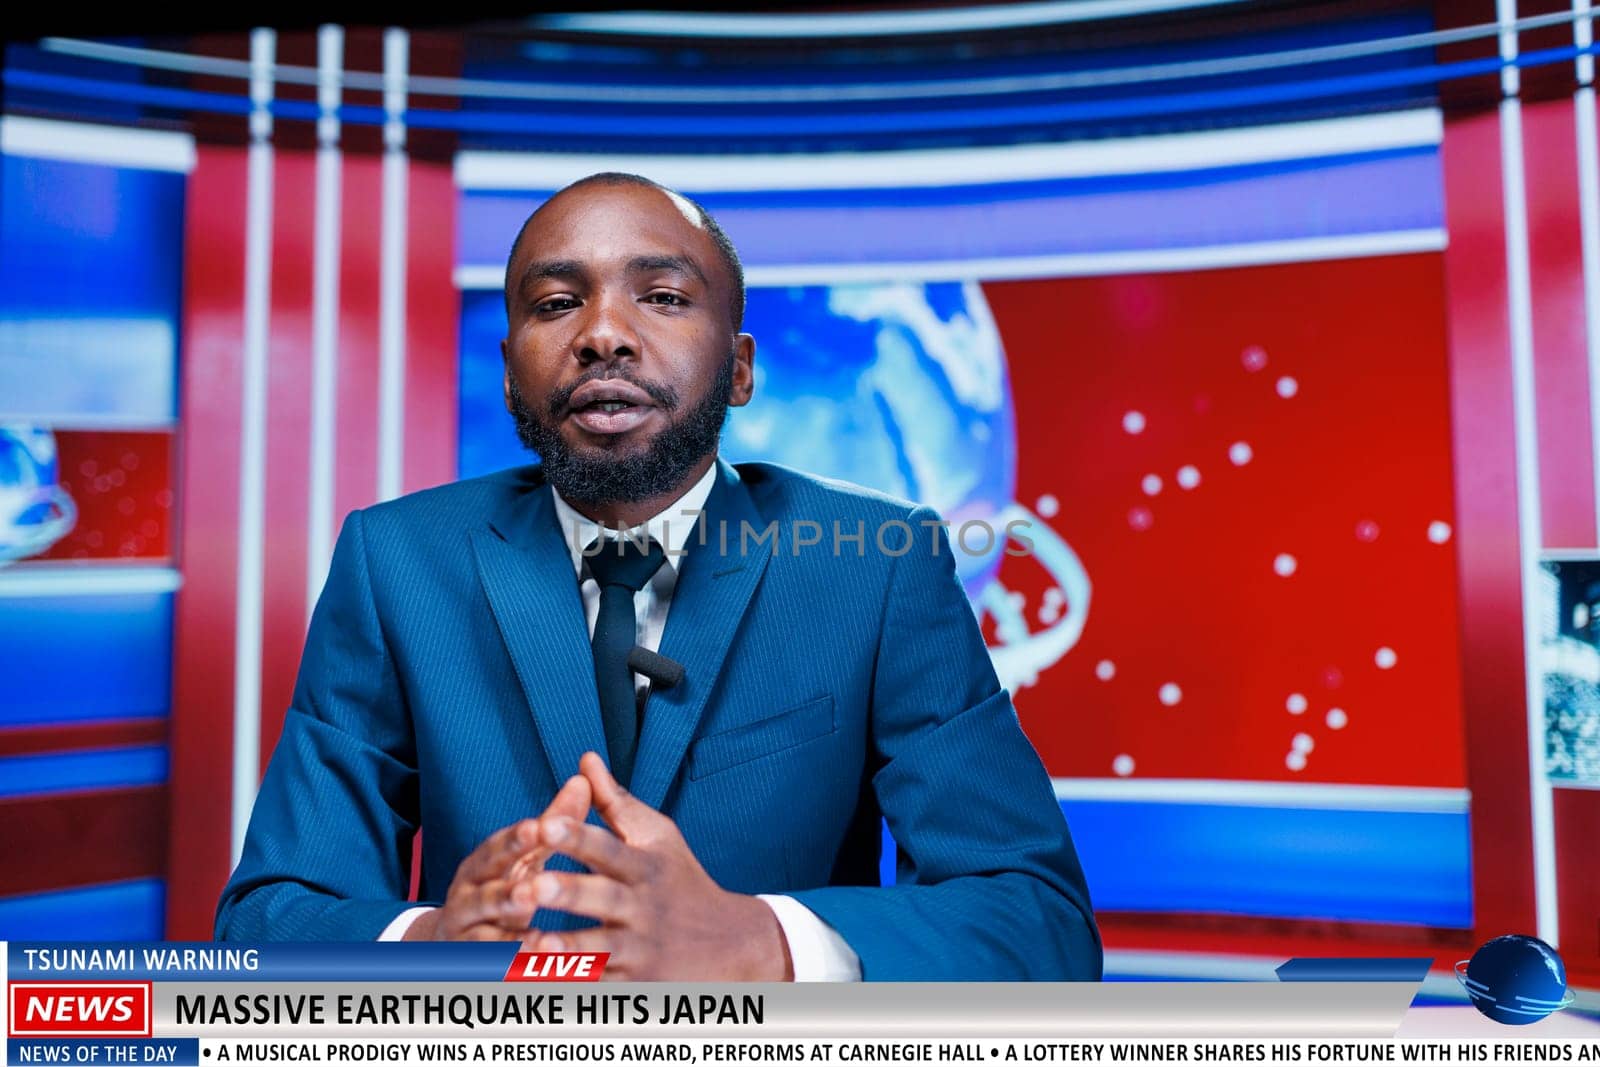 Broadcaster reveal earthquake news in japan, talking about catastrophic natural disaster in newsroom. African american journalist presenting global events and world problems live on television.